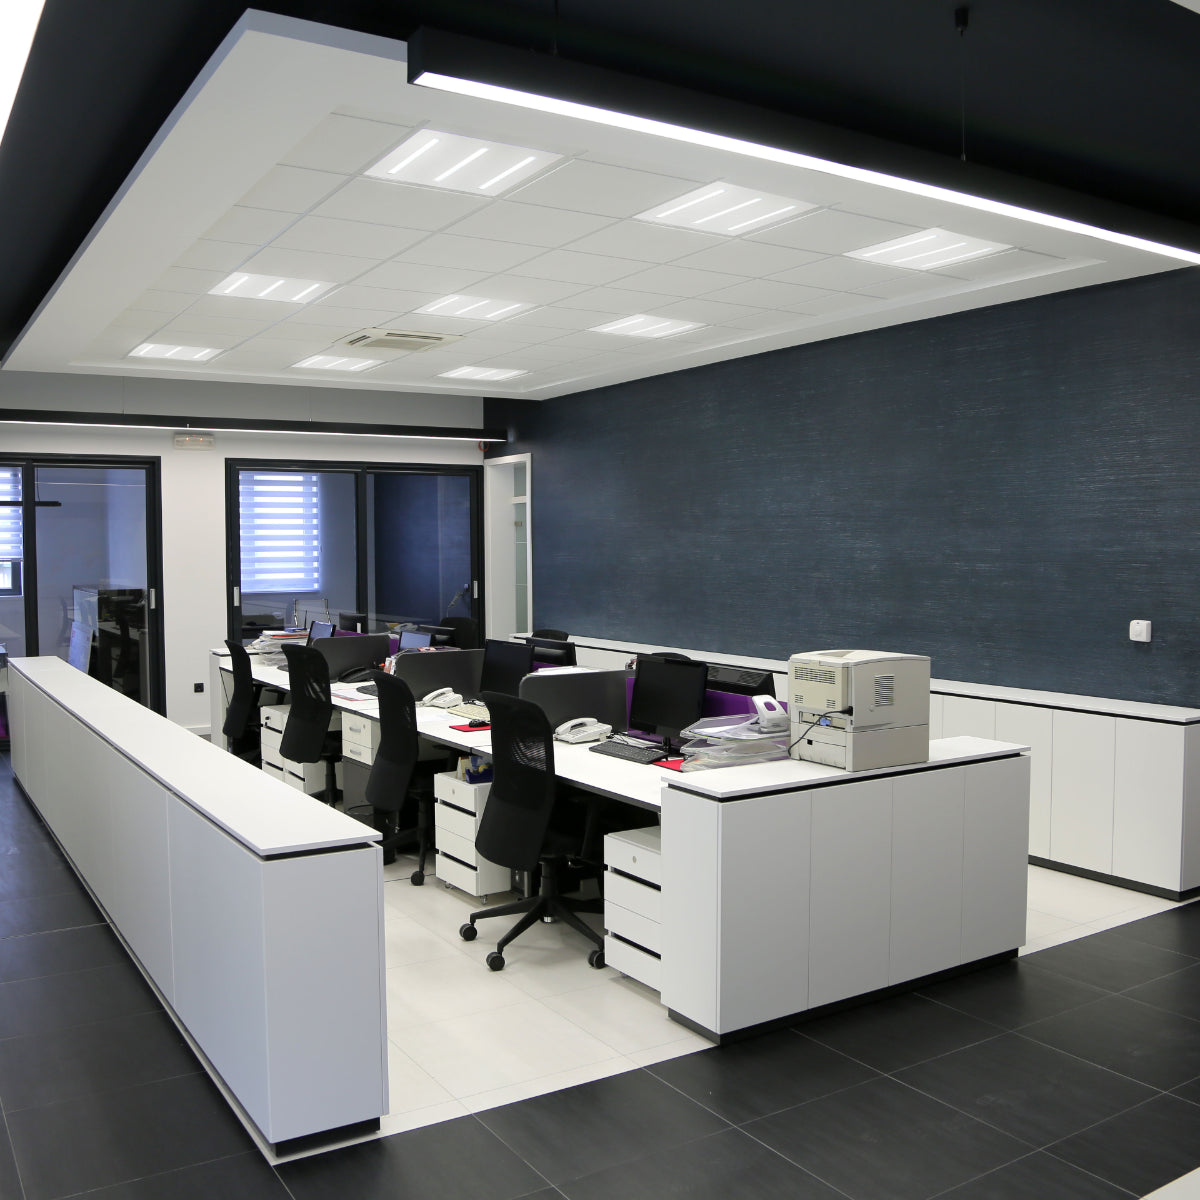 Where to use LuminEssence OfficePro LED Panel Light 40W 4000lm 600x600 3CCT 165-015058